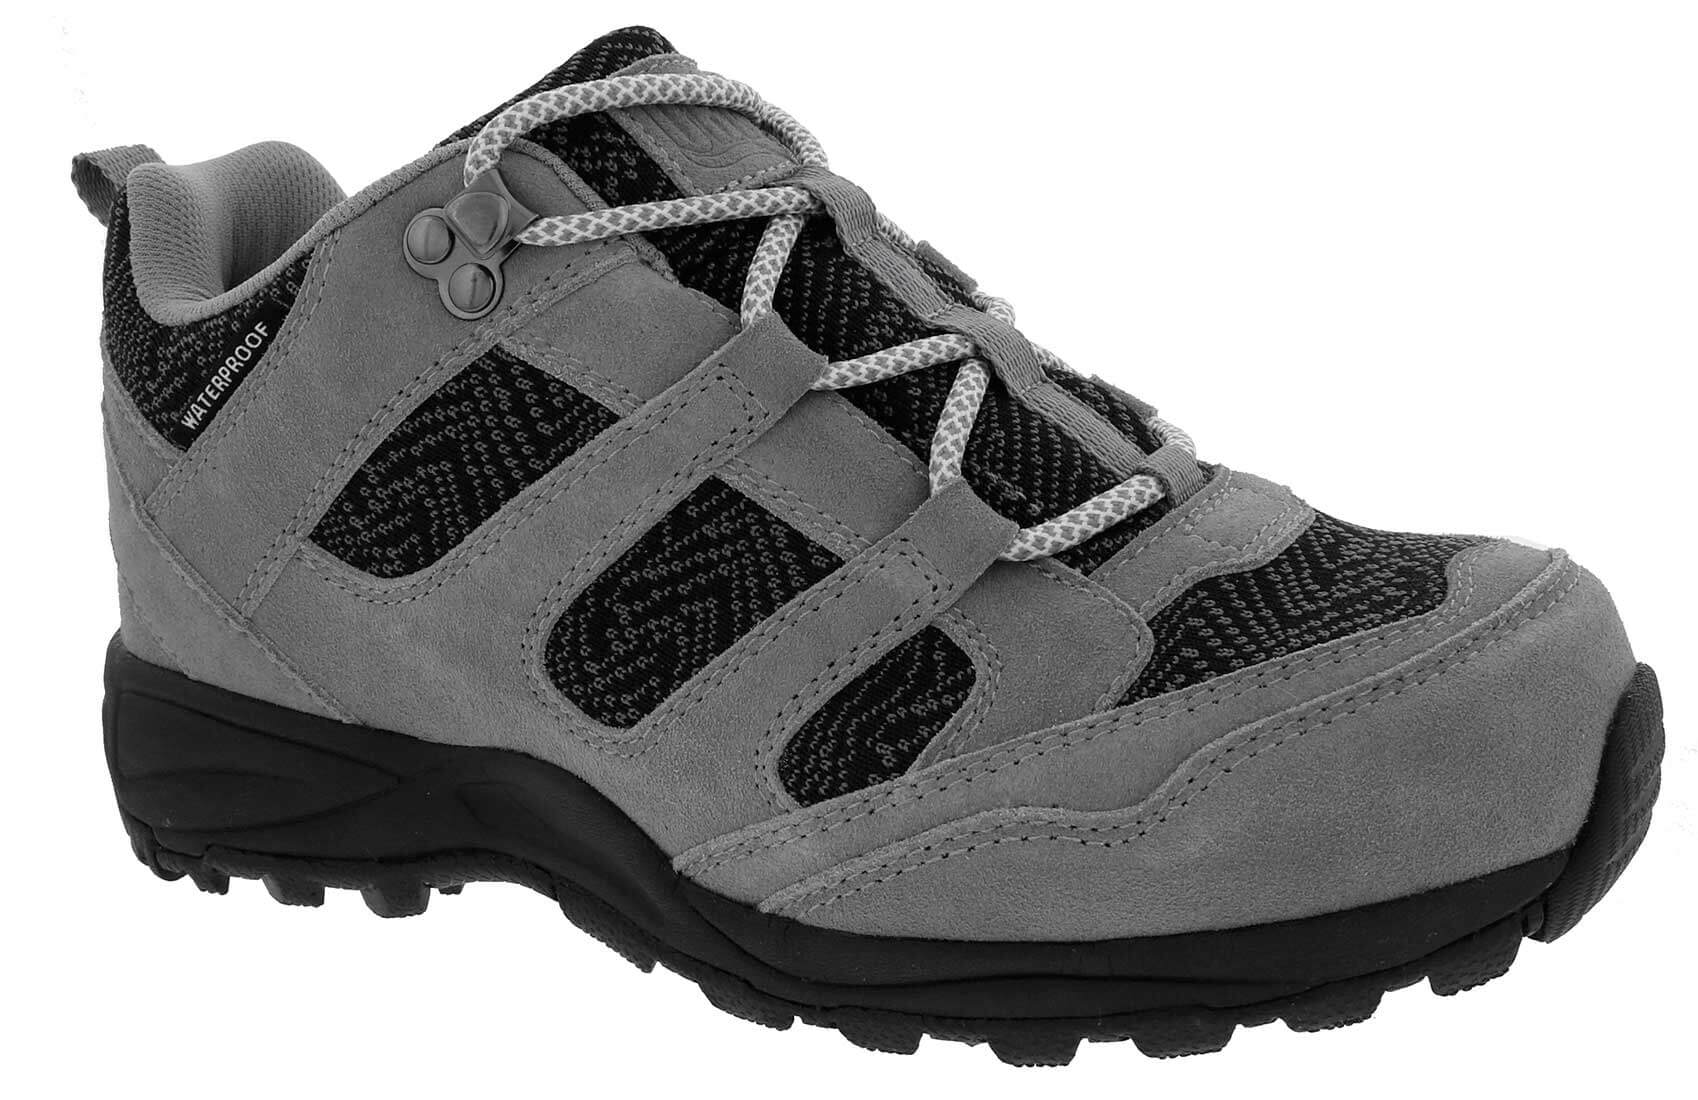 Drew Shoes Snowy 10190 - Women's 2 Comfort Therapeutic Diabetic Hiking Boot - Extra Depth For Orthotics